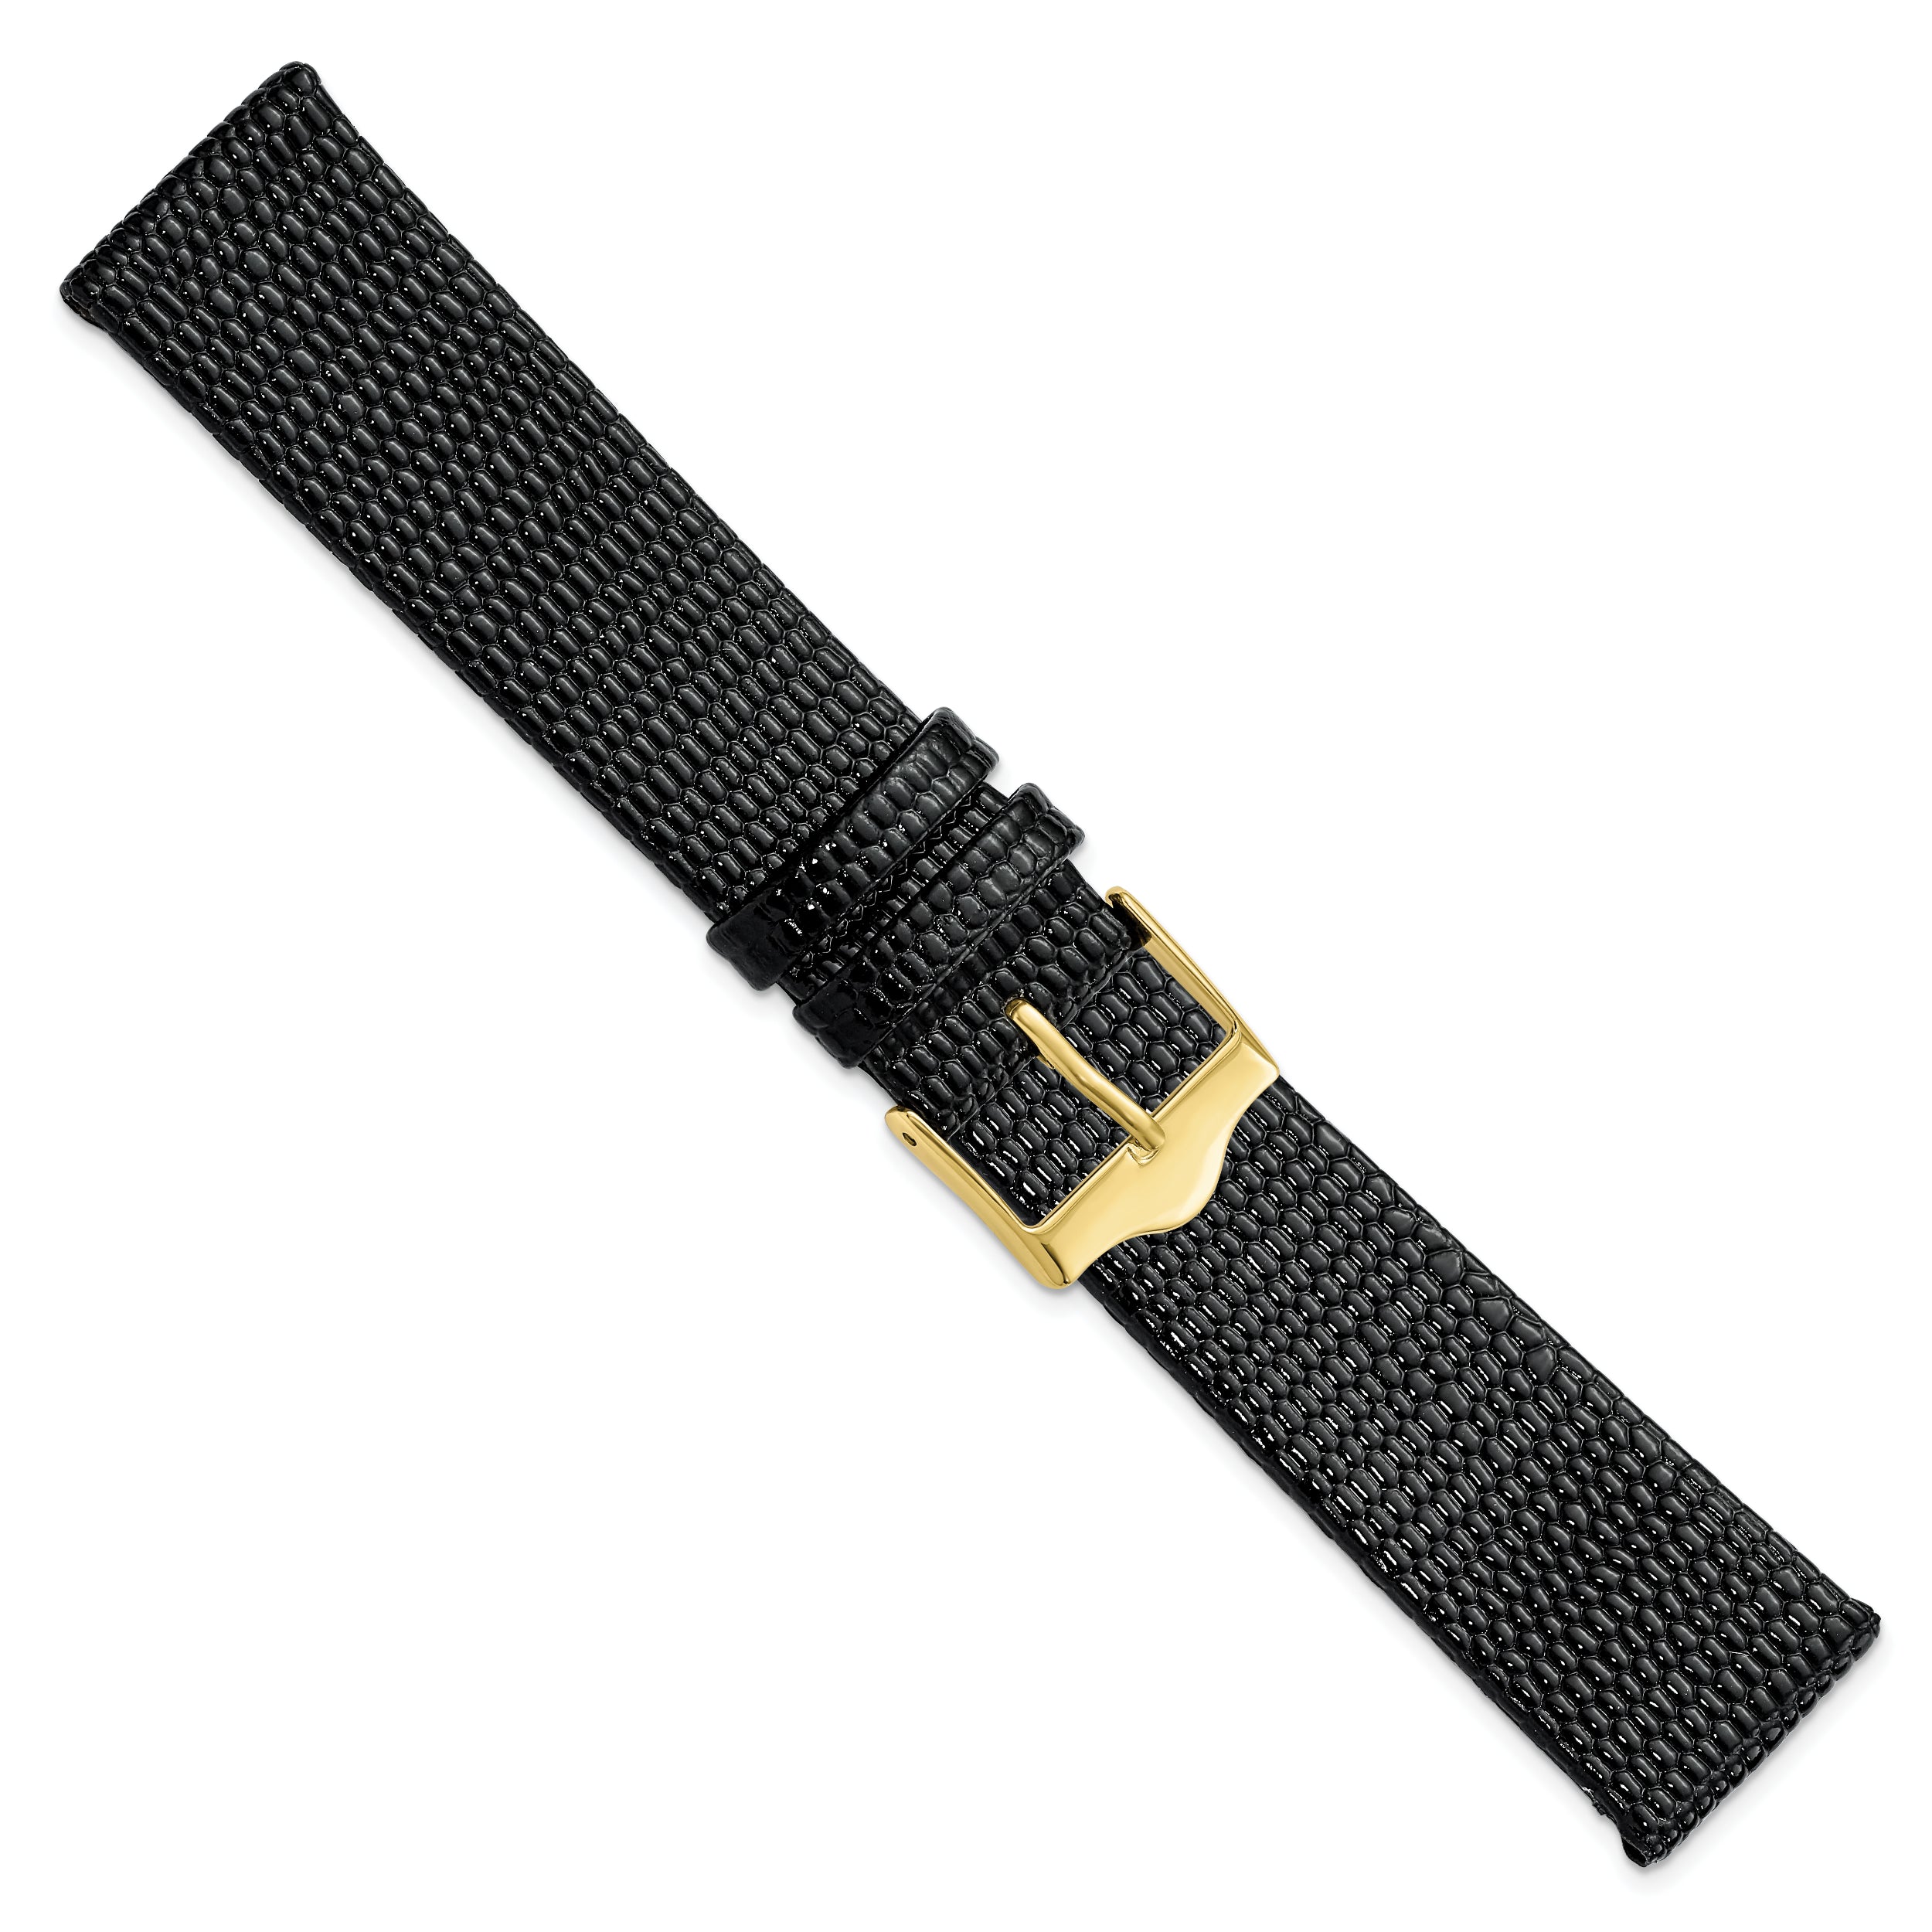 12mm Flat Black Lizard Grain Leather with Gold-tone Buckle 6.75 inch Watch Band